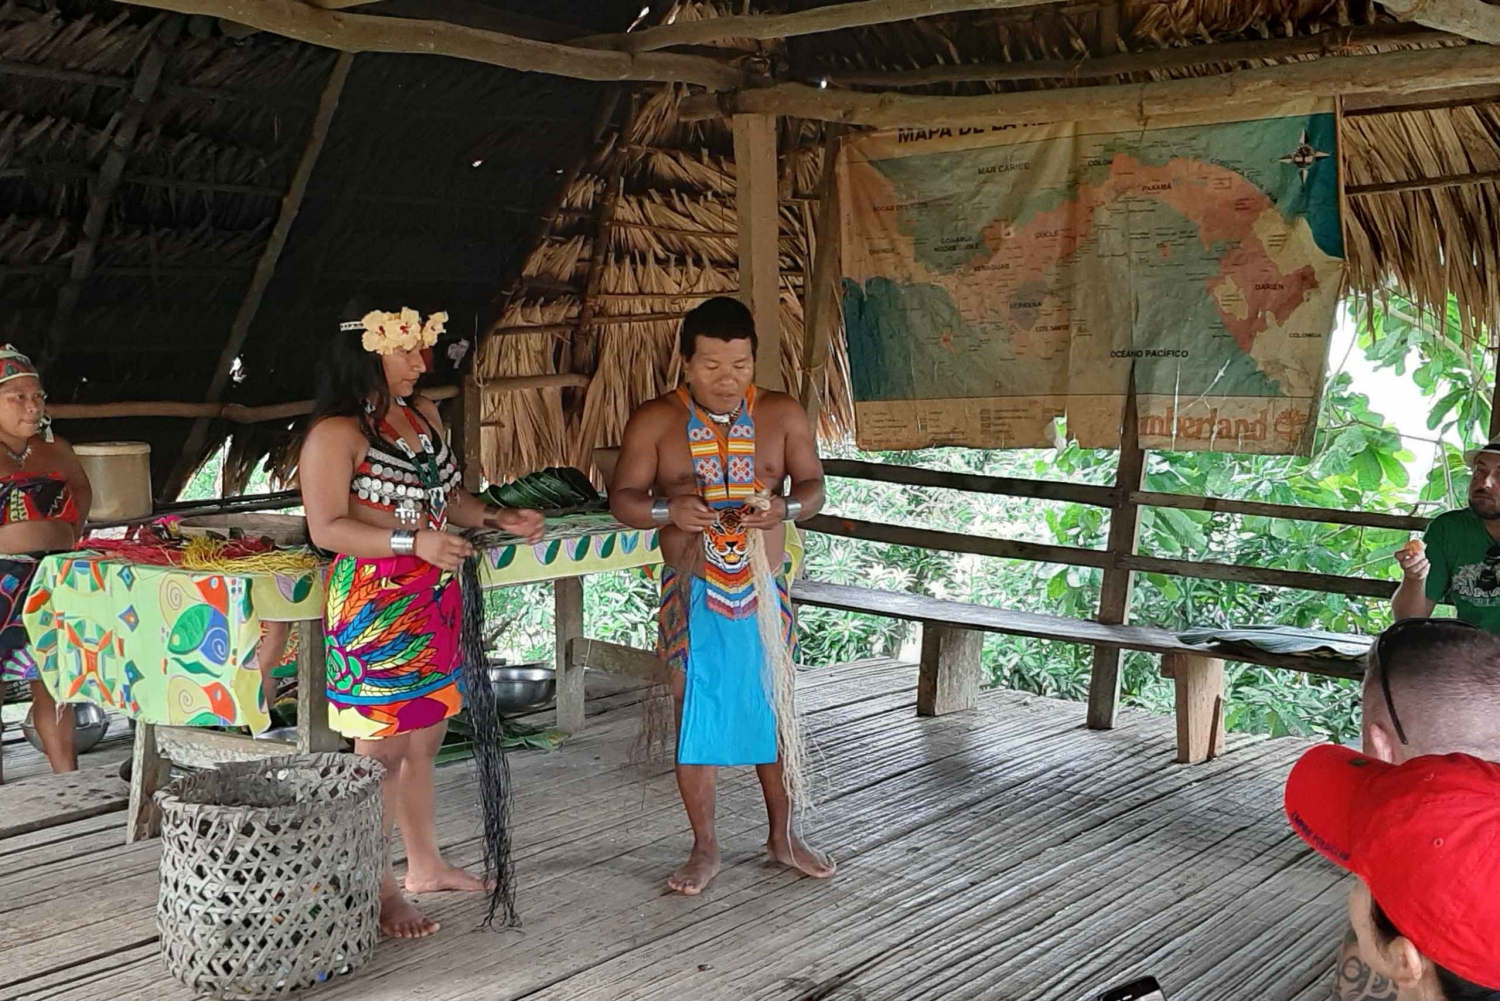 Private Tour to Monkey Island and Embera Village